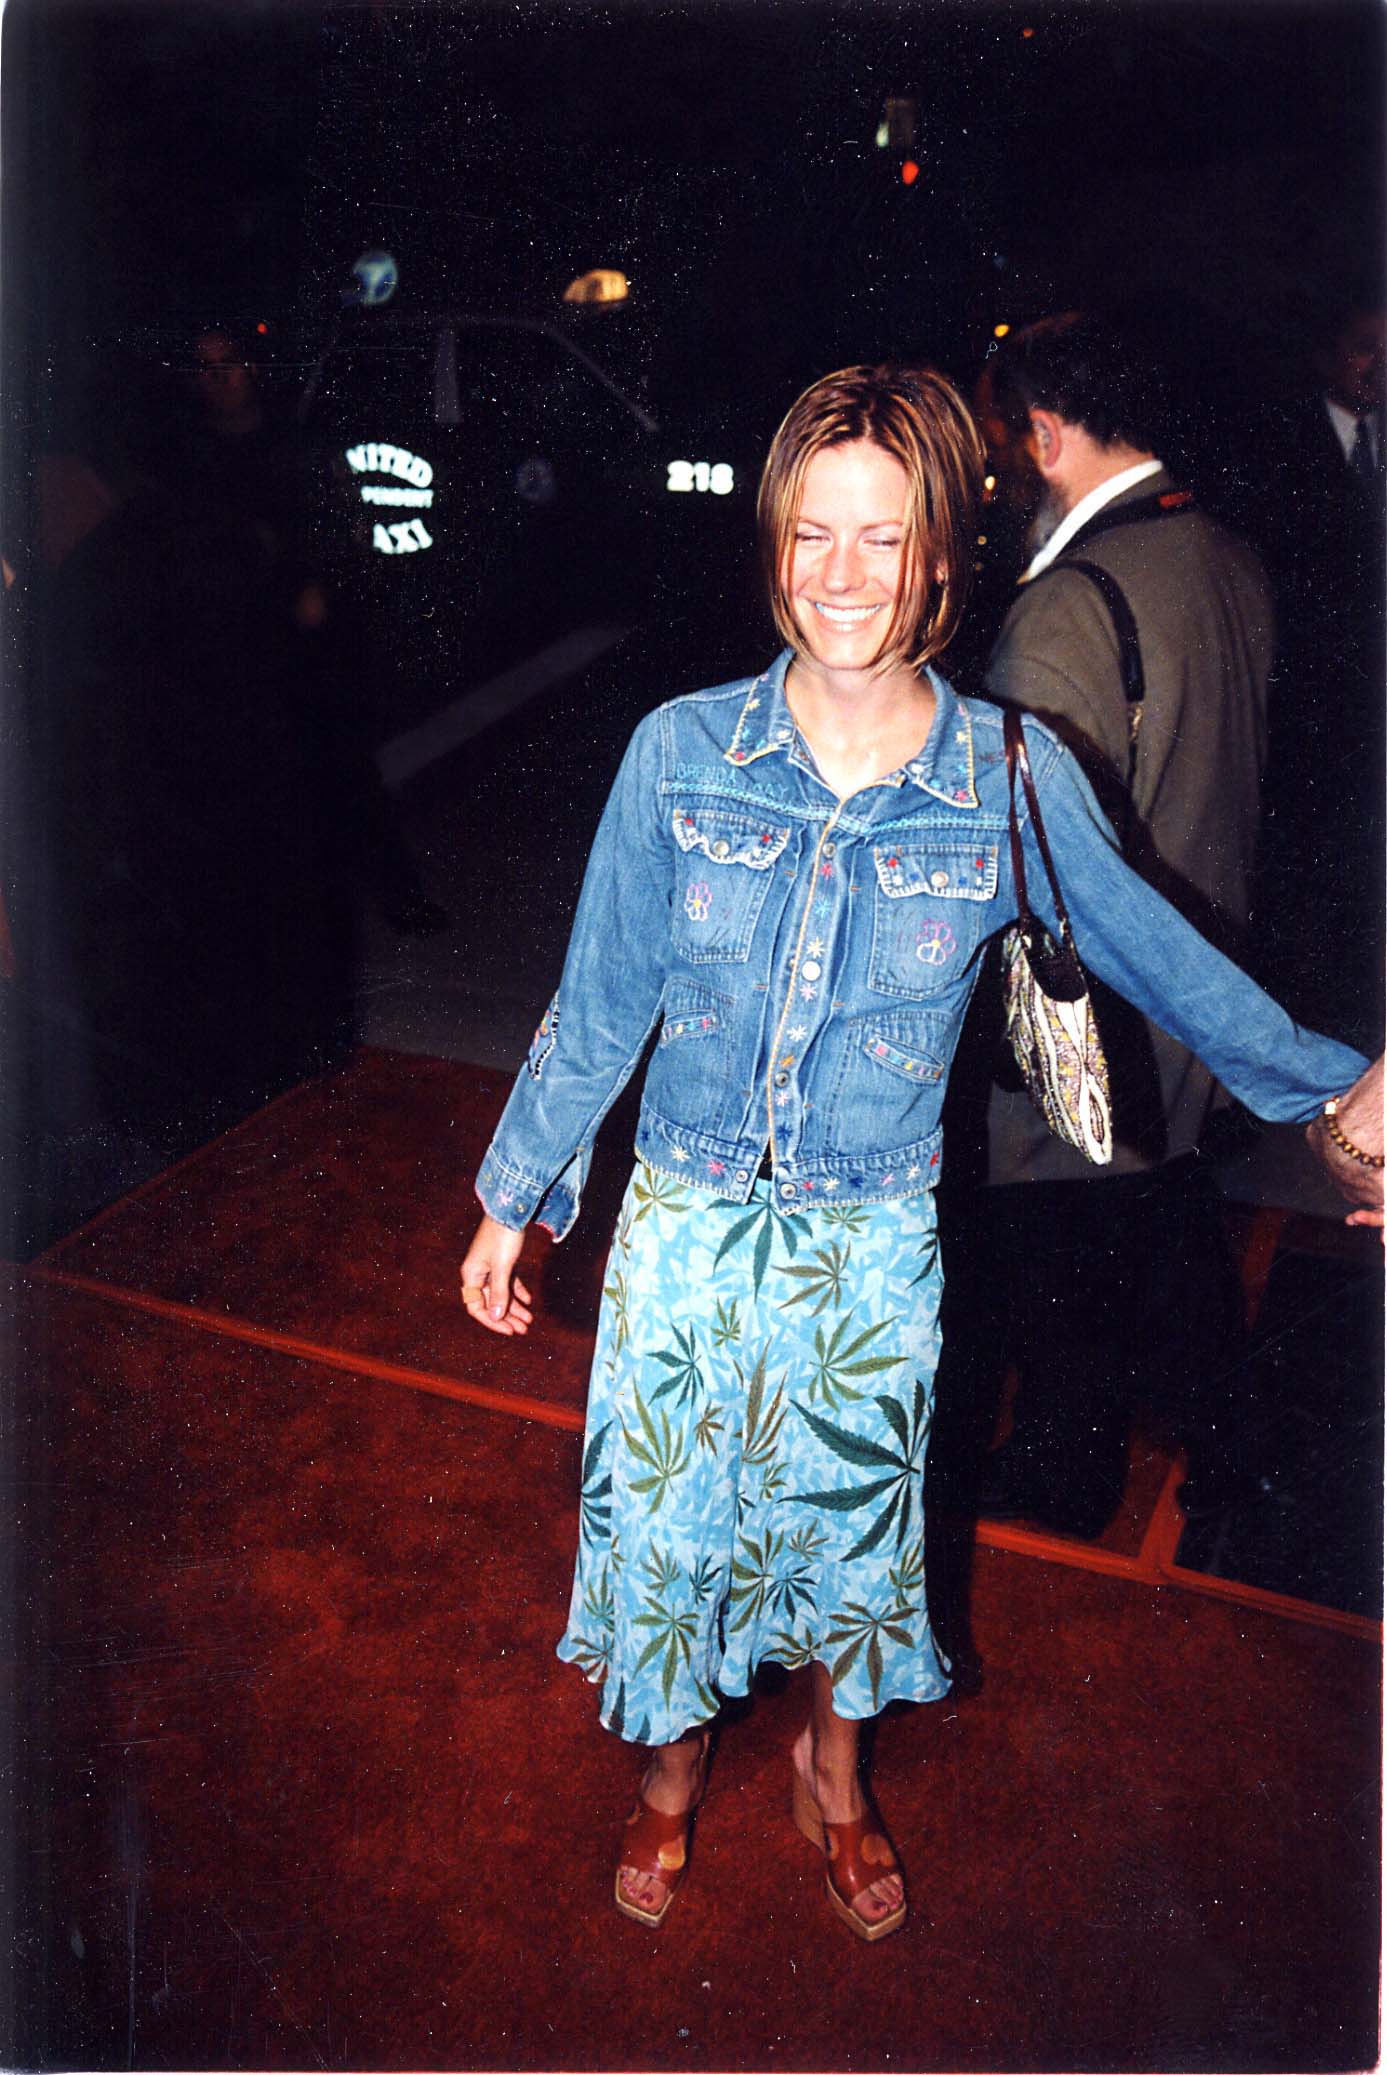 Courtney Brooke Wagner during "High Fidelity" premiere at El Captain Theatre on March 28, 2000 in Hollywood, California ┃Source: Getty Images